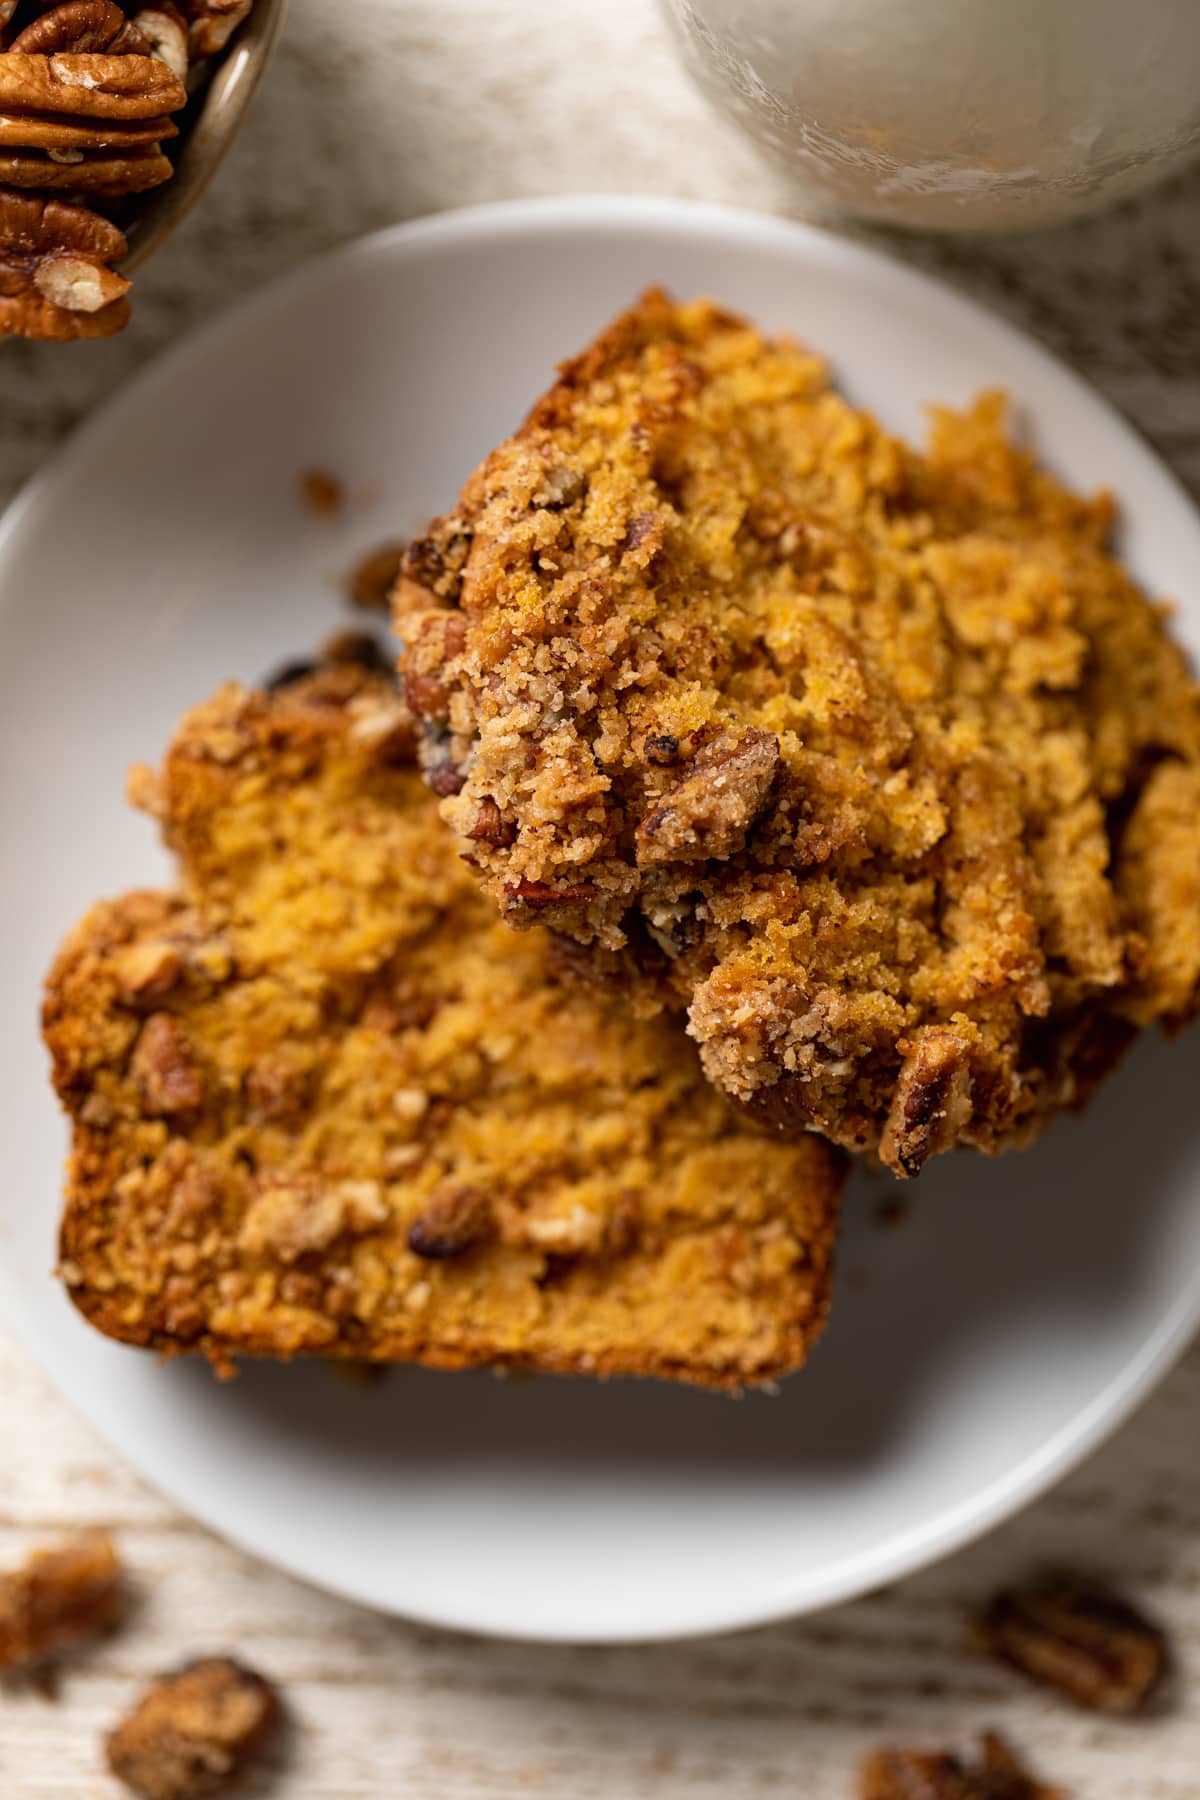 Slices of Vegan Sweet Potato Crumble Bread on a white plate